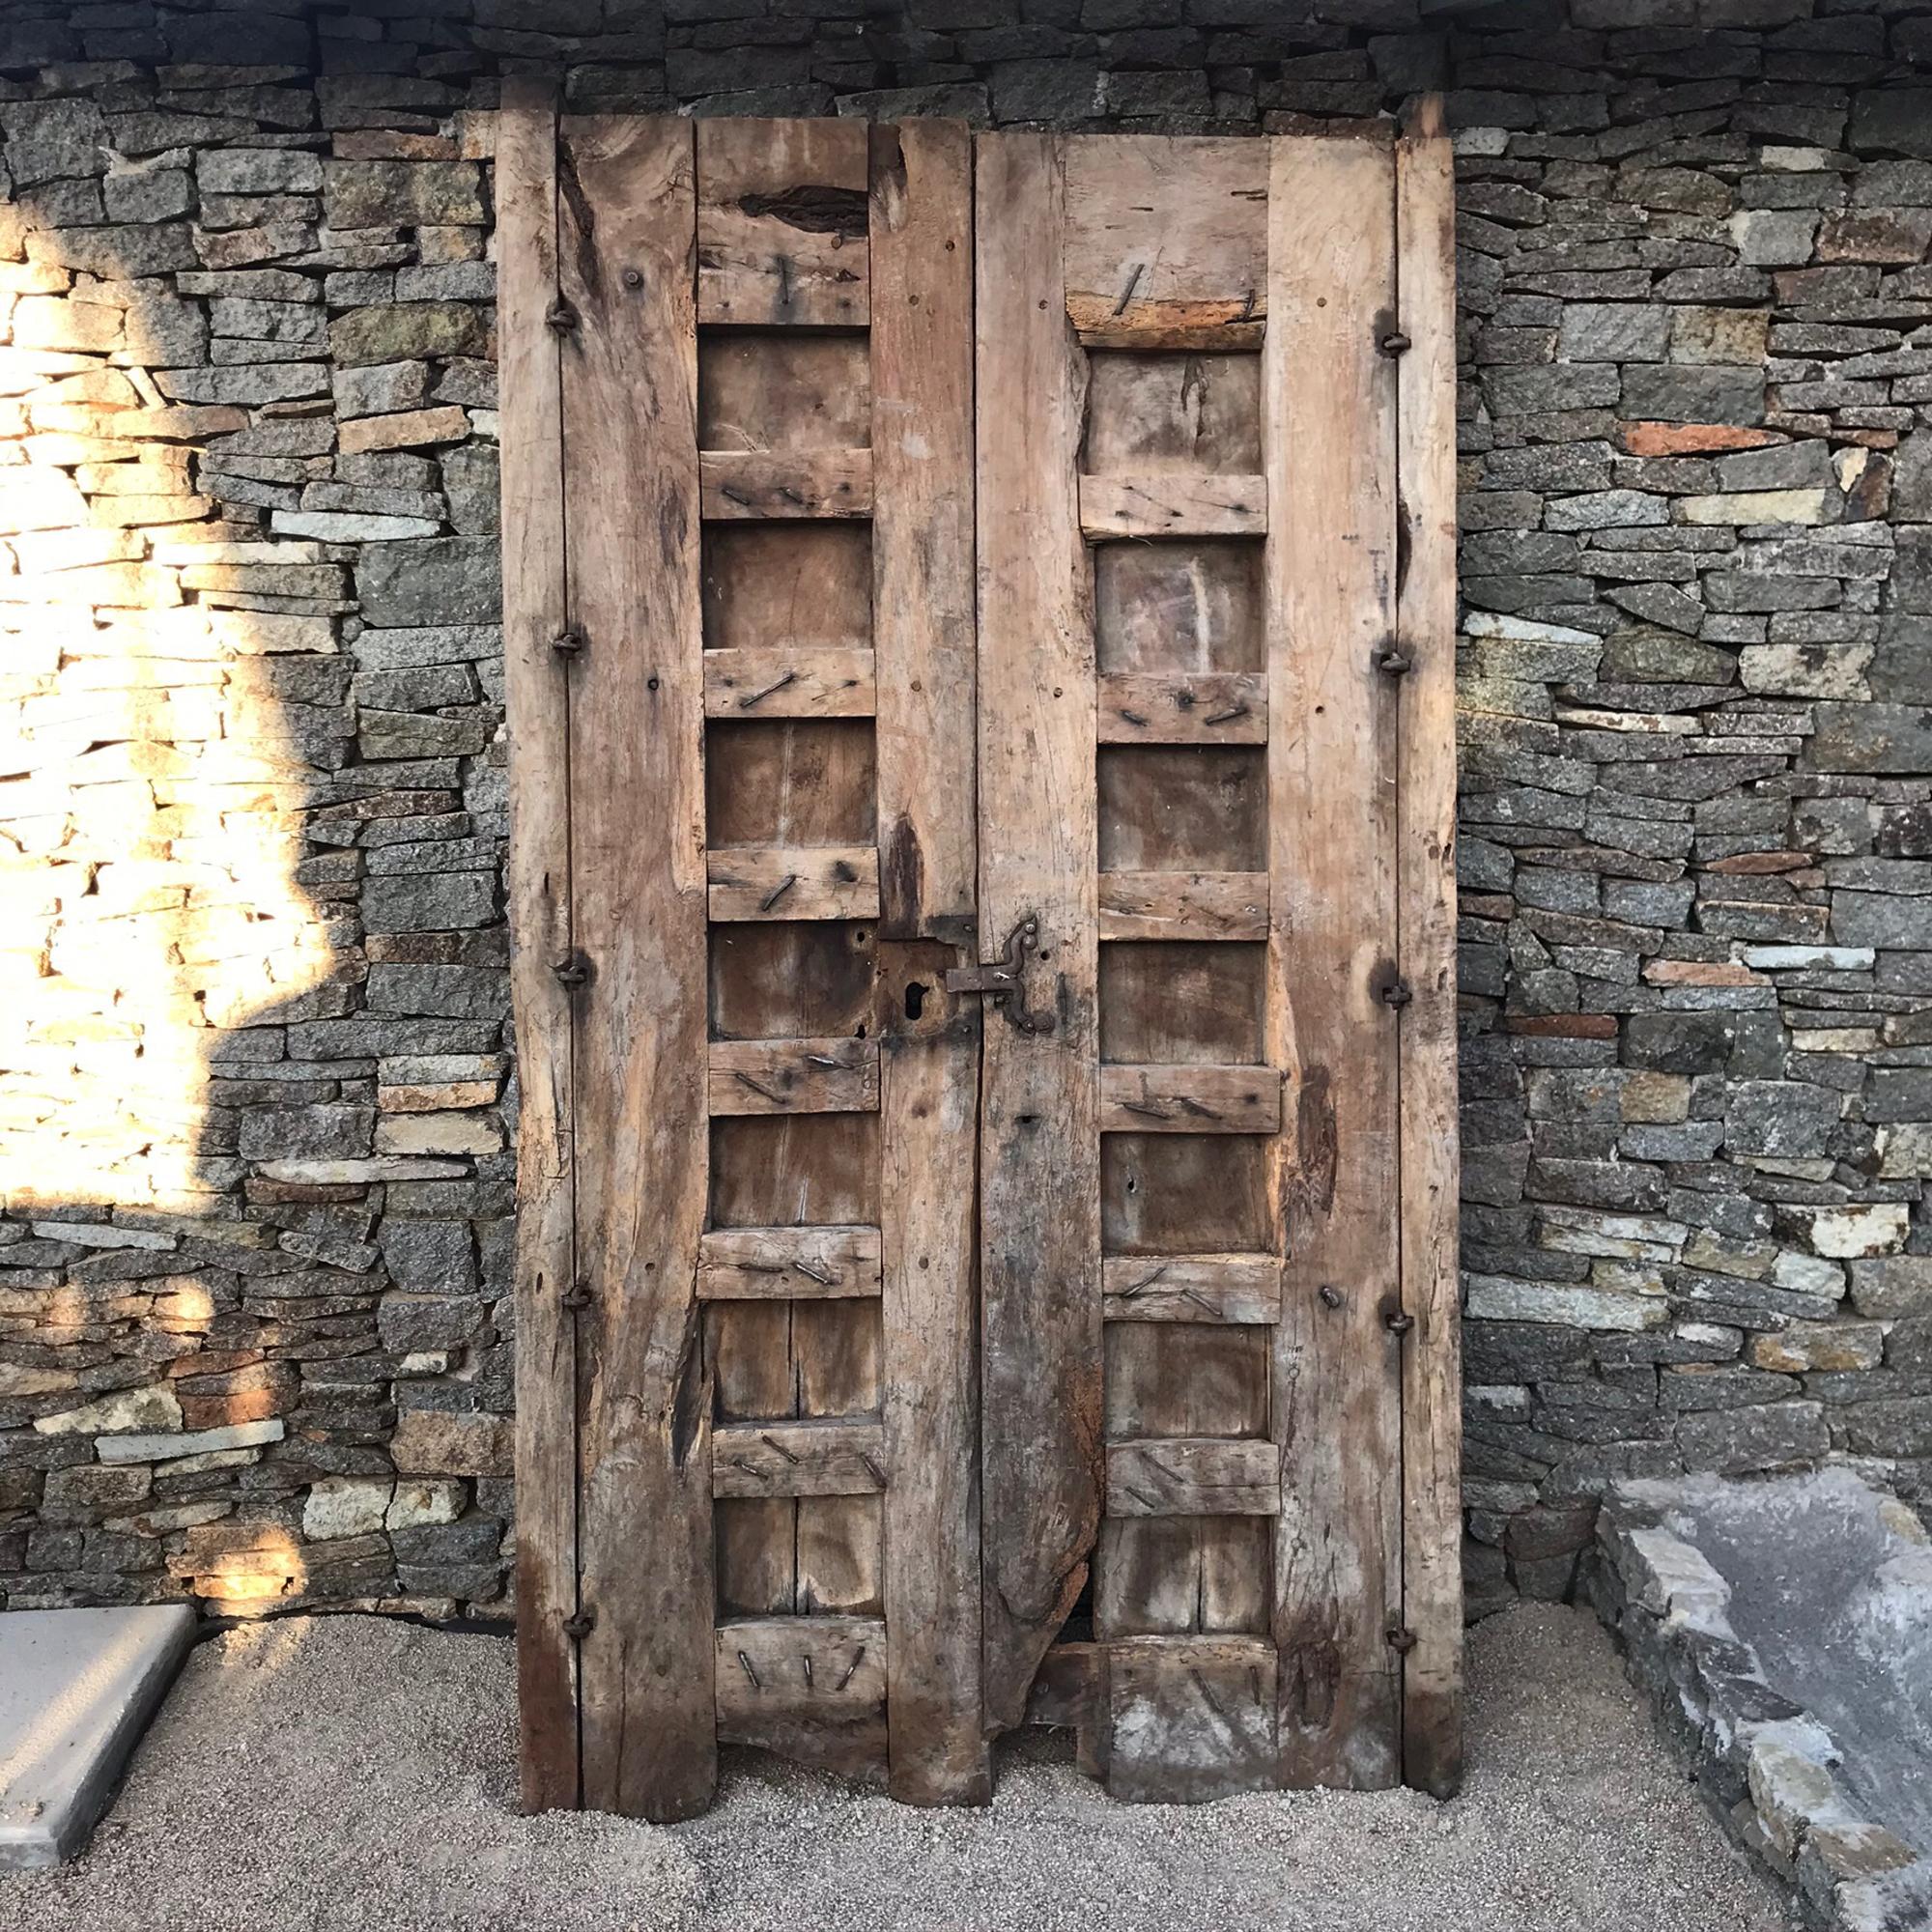 Rustic Door
From an old Hacienda in Jalisco, Mexico door in solid mesquite wood circa 1910-1920. 
Handmade by Mexican Artisans utilizing extremely hard Mesquite wood.
Dimensions: 47 W x 81.5 H x 4D, Each door panel 20.5 W inches
An unrestored item